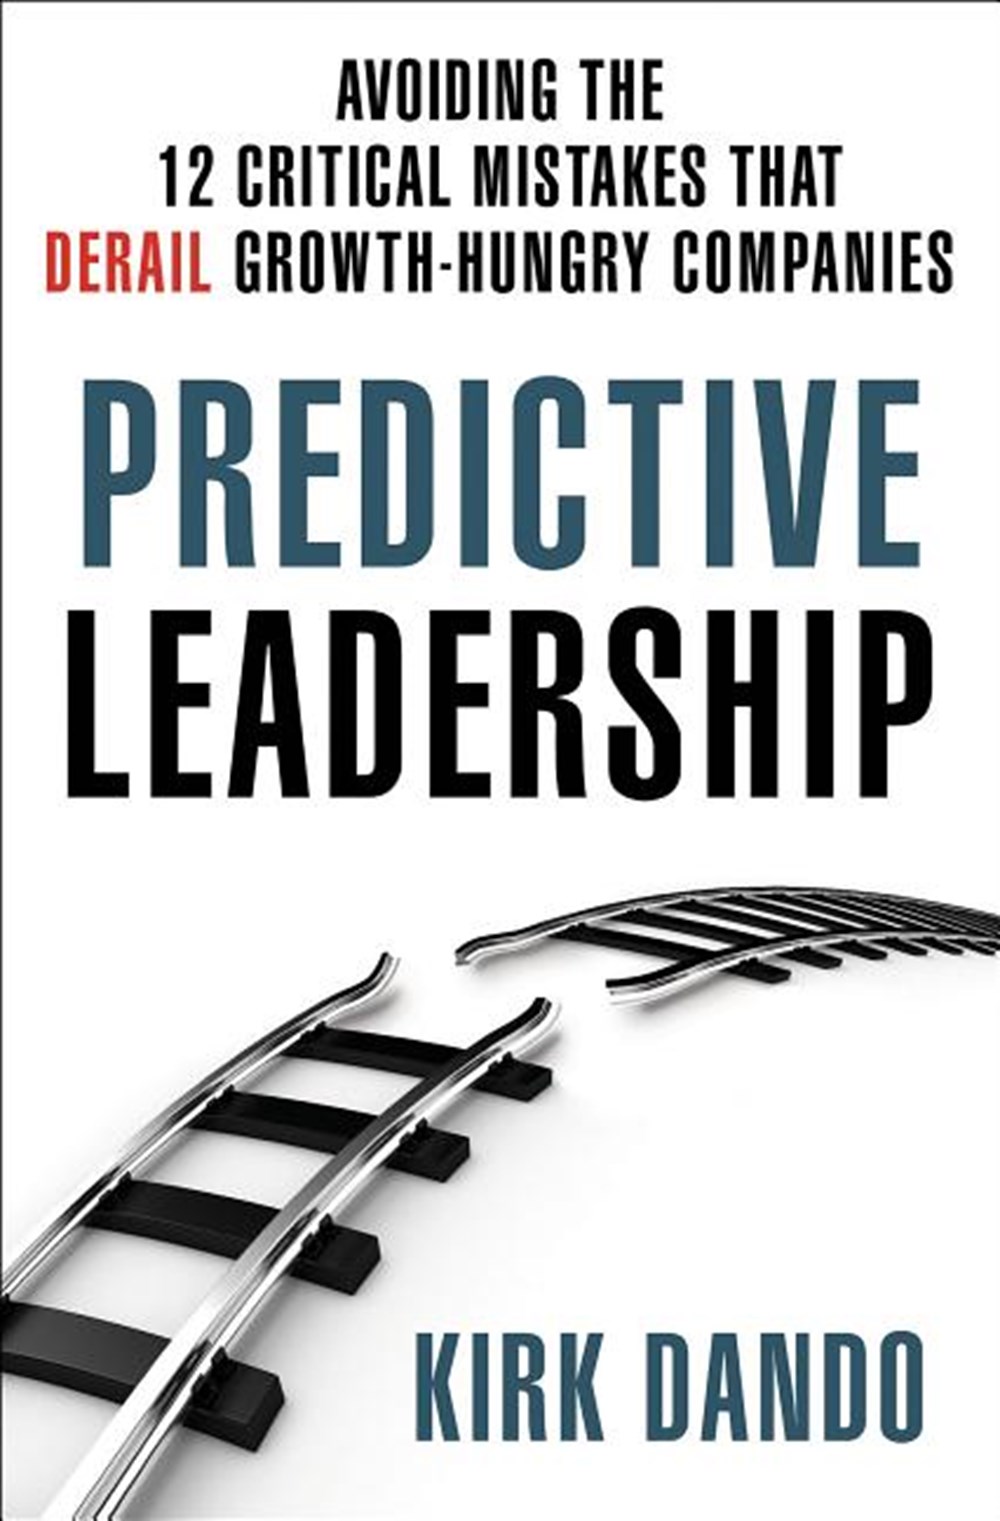 Predictive Leadership: Avoiding the 12 Critical Mistakes That Derail Growth-Hungry Companies